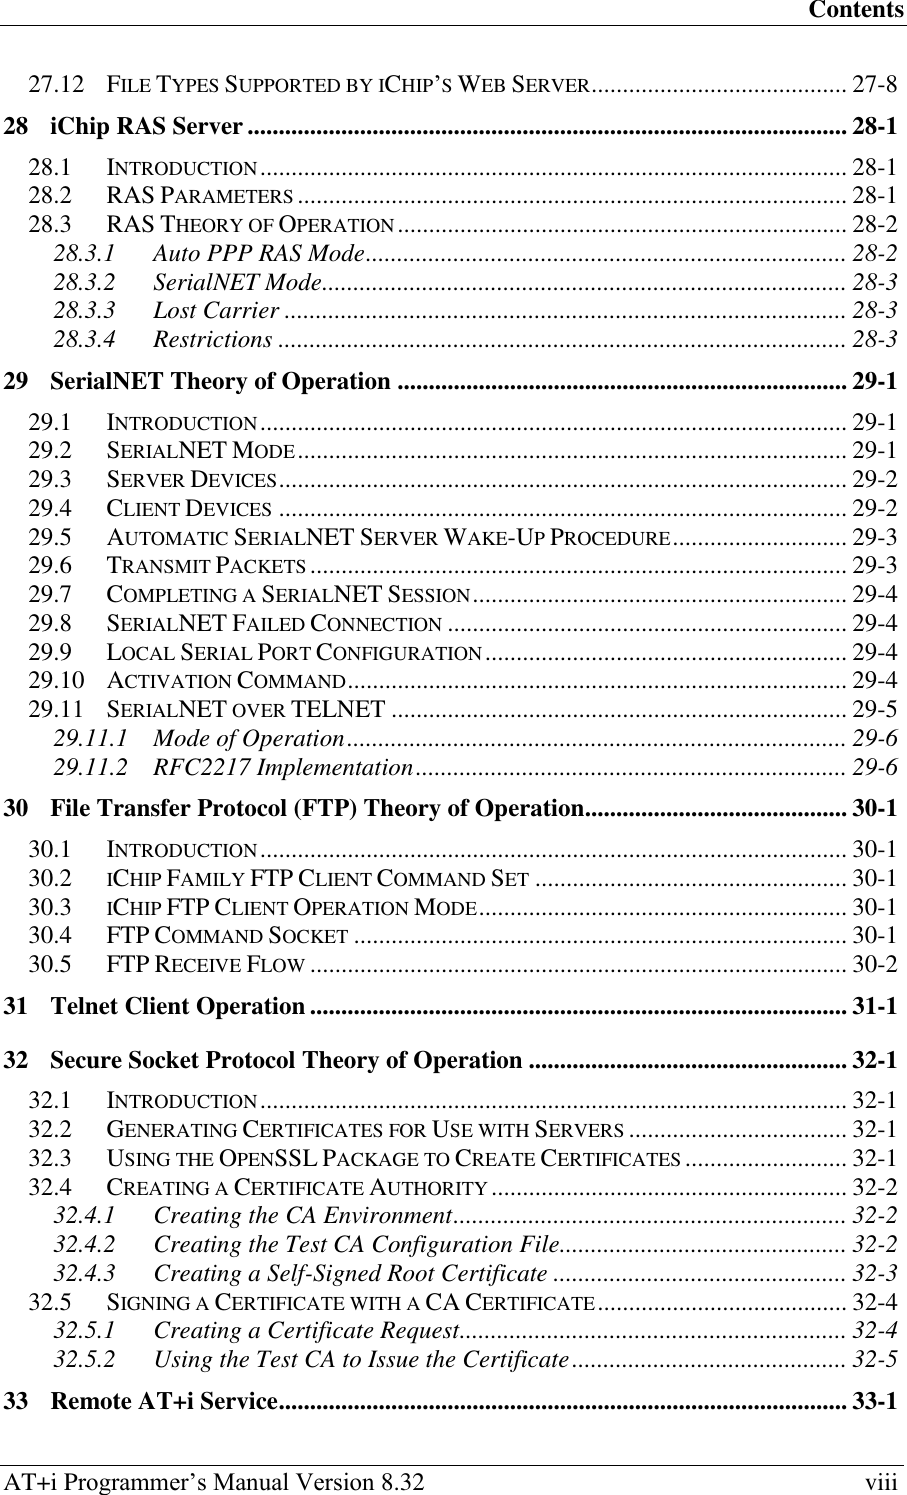 Contents AT+i Programmer‘s Manual Version 8.32  viii 27.12 FILE TYPES SUPPORTED BY ICHIP‘S WEB SERVER ......................................... 27-8 28 iChip RAS Server ................................................................................................ 28-1 28.1 INTRODUCTION .............................................................................................. 28-1 28.2 RAS PARAMETERS ........................................................................................ 28-1 28.3 RAS THEORY OF OPERATION ........................................................................ 28-2 28.3.1 Auto PPP RAS Mode ............................................................................. 28-2 28.3.2 SerialNET Mode .................................................................................... 28-3 28.3.3 Lost Carrier .......................................................................................... 28-3 28.3.4 Restrictions ........................................................................................... 28-3 29 SerialNET Theory of Operation ........................................................................ 29-1 29.1 INTRODUCTION .............................................................................................. 29-1 29.2 SERIALNET MODE ........................................................................................ 29-1 29.3 SERVER DEVICES ........................................................................................... 29-2 29.4 CLIENT DEVICES ........................................................................................... 29-2 29.5 AUTOMATIC SERIALNET SERVER WAKE-UP PROCEDURE ............................ 29-3 29.6 TRANSMIT PACKETS ...................................................................................... 29-3 29.7 COMPLETING A SERIALNET SESSION ............................................................ 29-4 29.8 SERIALNET FAILED CONNECTION ................................................................ 29-4 29.9 LOCAL SERIAL PORT CONFIGURATION .......................................................... 29-4 29.10 ACTIVATION COMMAND ................................................................................ 29-4 29.11 SERIALNET OVER TELNET ......................................................................... 29-5 29.11.1 Mode of Operation ................................................................................ 29-6 29.11.2 RFC2217 Implementation ..................................................................... 29-6 30 File Transfer Protocol (FTP) Theory of Operation.......................................... 30-1 30.1 INTRODUCTION .............................................................................................. 30-1 30.2 ICHIP FAMILY FTP CLIENT COMMAND SET .................................................. 30-1 30.3 ICHIP FTP CLIENT OPERATION MODE ........................................................... 30-1 30.4 FTP COMMAND SOCKET ............................................................................... 30-1 30.5 FTP RECEIVE FLOW ...................................................................................... 30-2 31 Telnet Client Operation ...................................................................................... 31-1 32 Secure Socket Protocol Theory of Operation ................................................... 32-1 32.1 INTRODUCTION .............................................................................................. 32-1 32.2 GENERATING CERTIFICATES FOR USE WITH SERVERS ................................... 32-1 32.3 USING THE OPENSSL PACKAGE TO CREATE CERTIFICATES .......................... 32-1 32.4 CREATING A CERTIFICATE AUTHORITY ......................................................... 32-2 32.4.1 Creating the CA Environment ............................................................... 32-2 32.4.2 Creating the Test CA Configuration File .............................................. 32-2 32.4.3 Creating a Self-Signed Root Certificate ............................................... 32-3 32.5 SIGNING A CERTIFICATE WITH A CA CERTIFICATE ........................................ 32-4 32.5.1 Creating a Certificate Request .............................................................. 32-4 32.5.2 Using the Test CA to Issue the Certificate ............................................ 32-5 33 Remote AT+i Service ........................................................................................... 33-1 